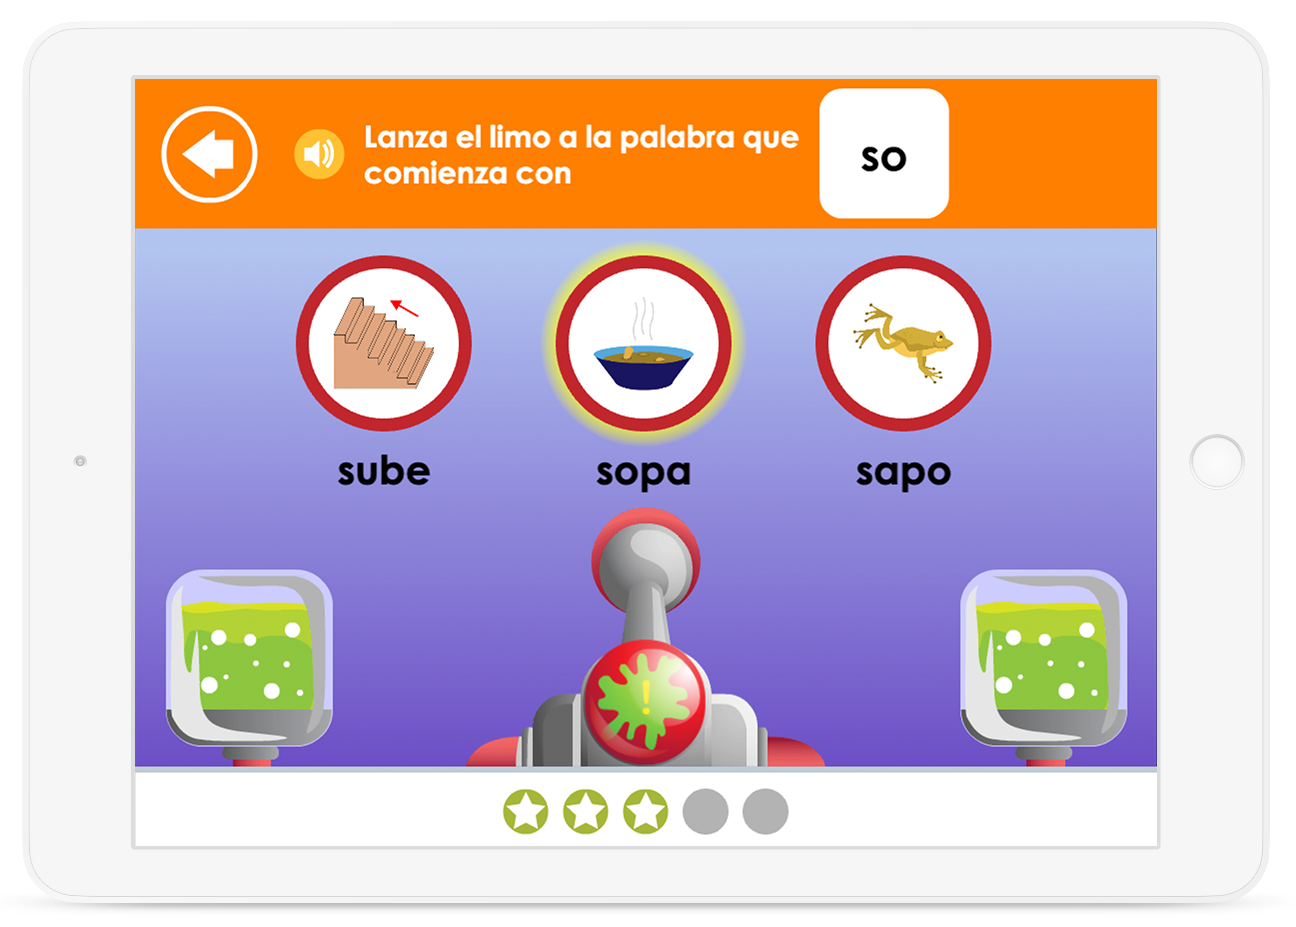 Practice phonological awareness skills such as identifying the first sound in a word in English and/or in Spanish.